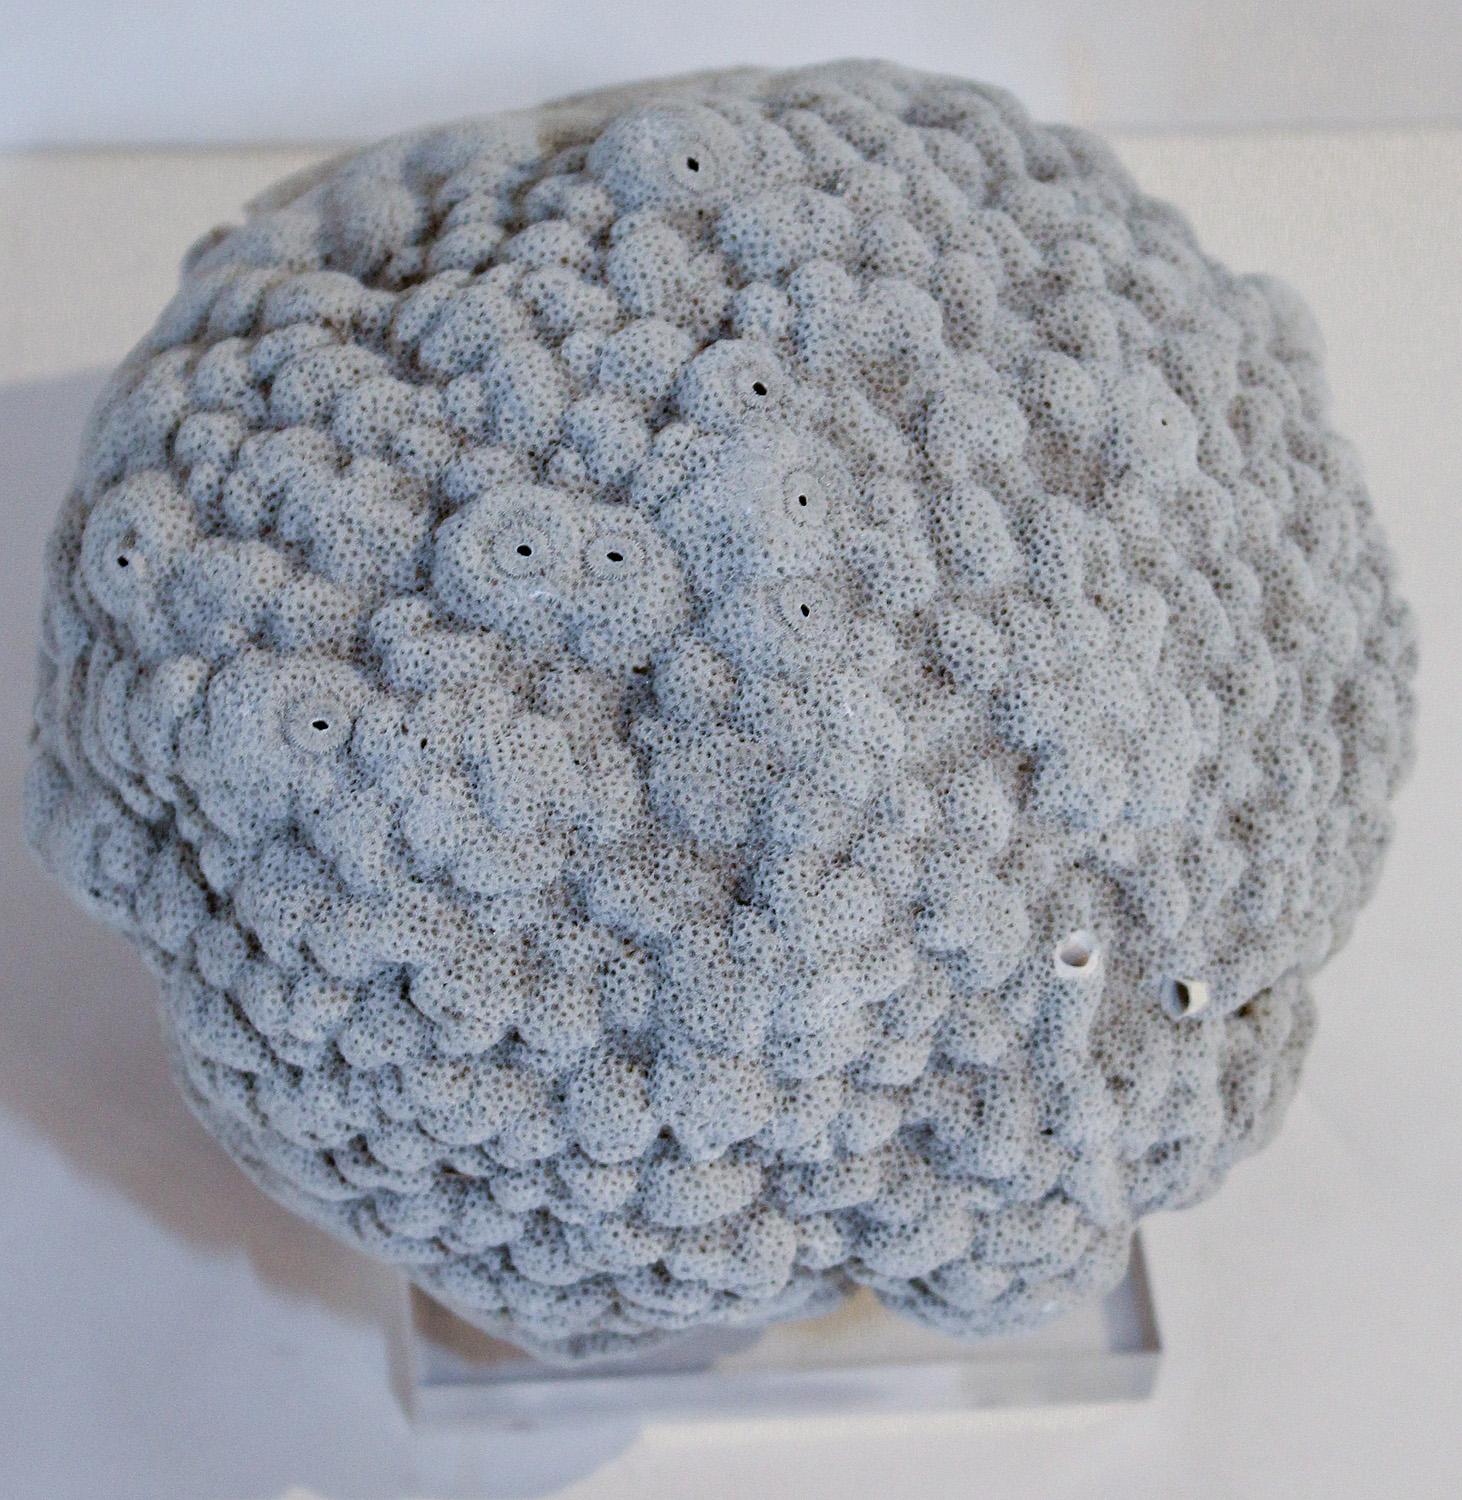 Soft gray natural brain coral specimen on an acrylic and brass display stand.